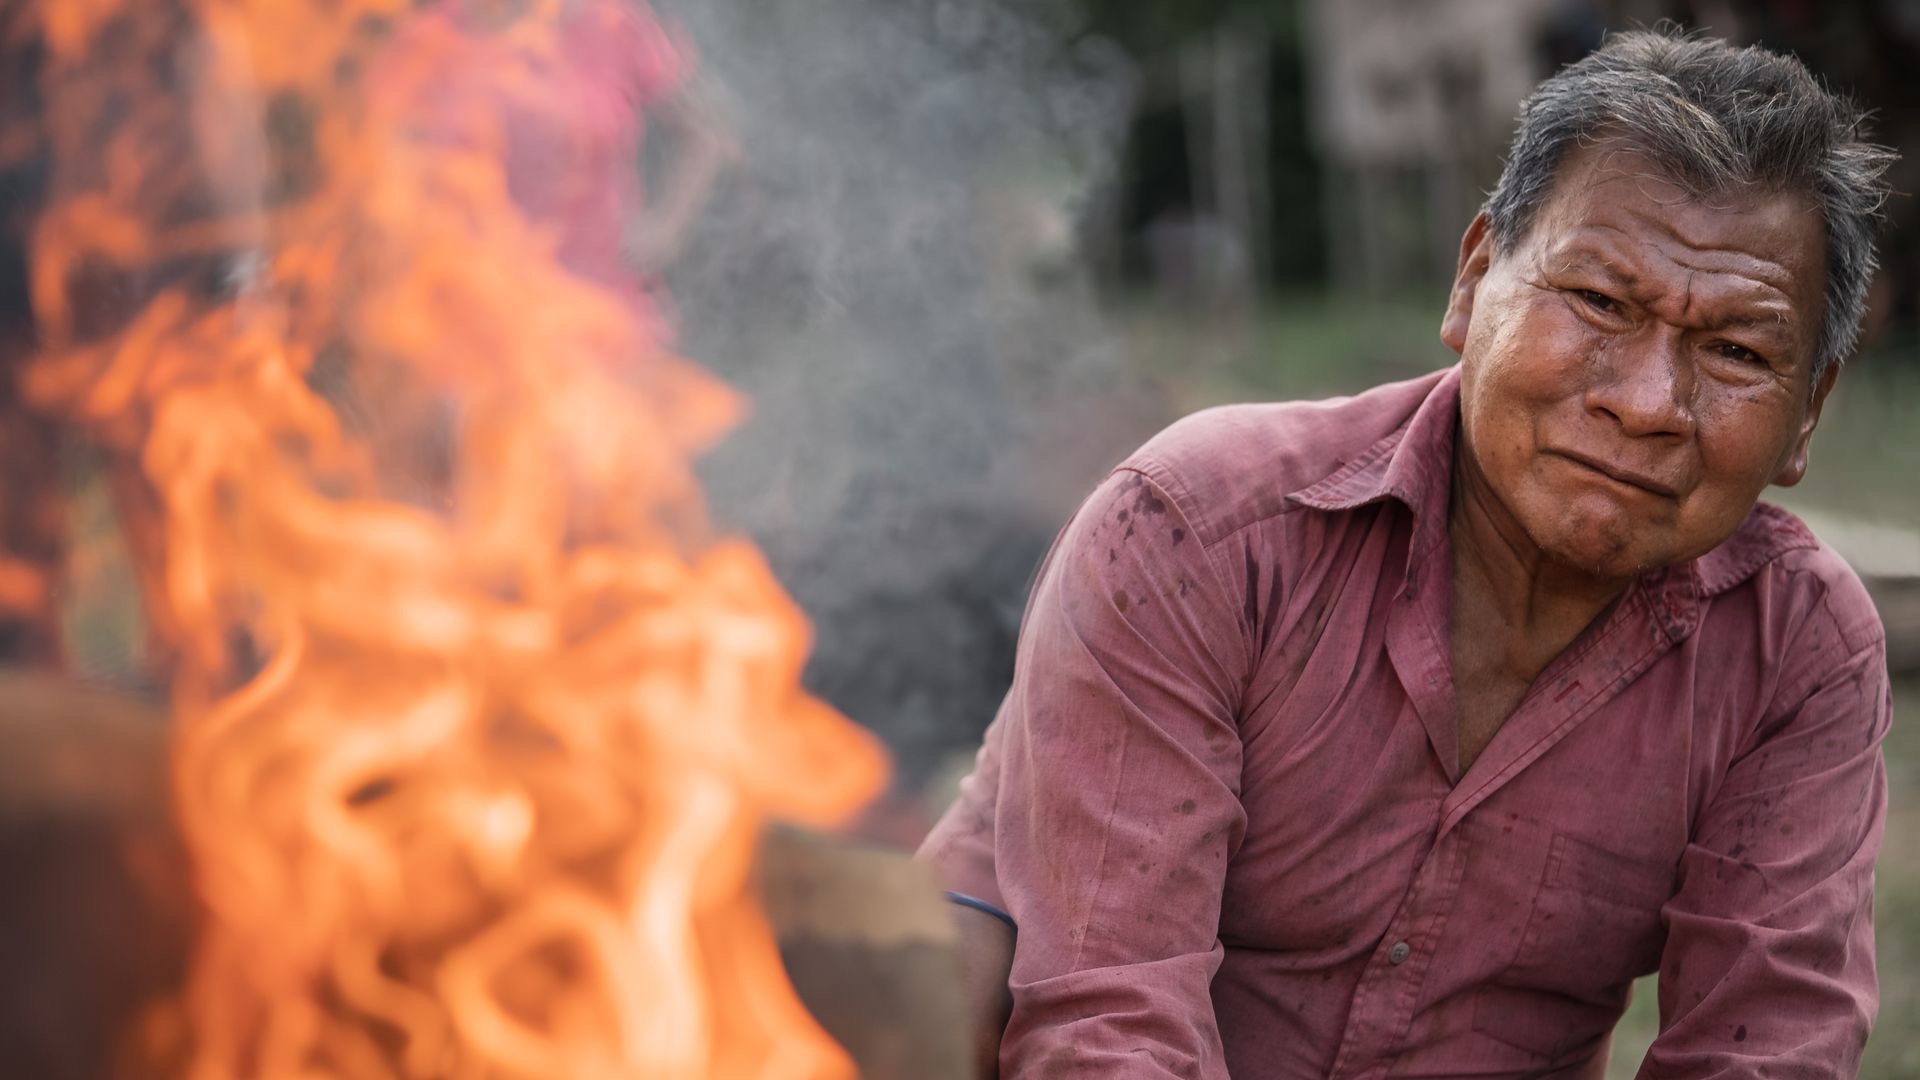 a maijuna man looks at a fire with a pained expression on his face, taken by Ben Hemmings